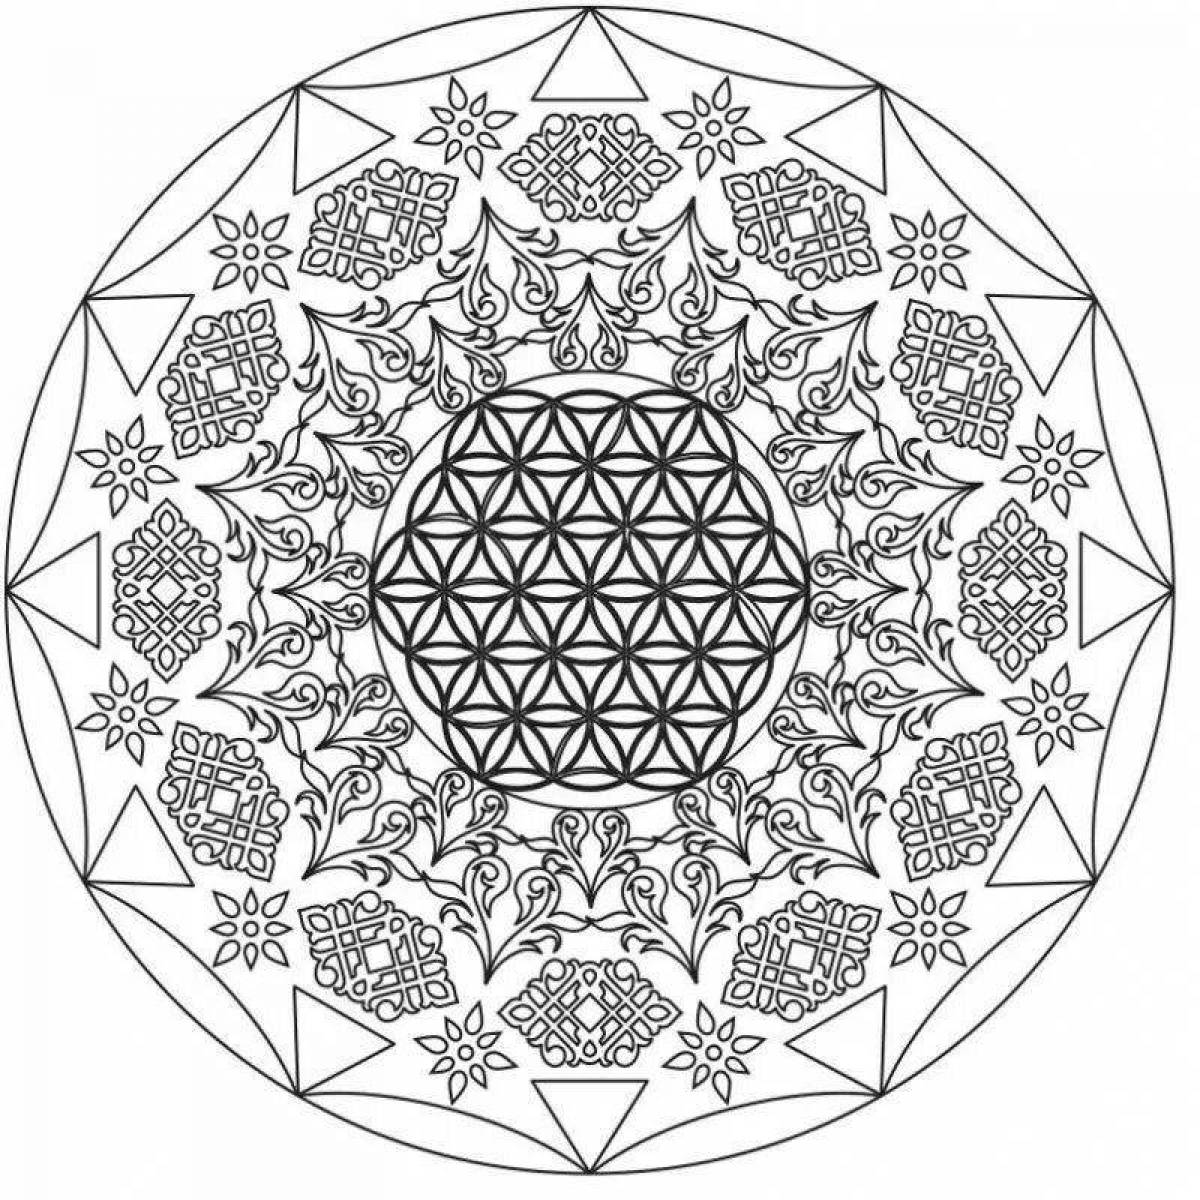 Blooming coloring flower of life